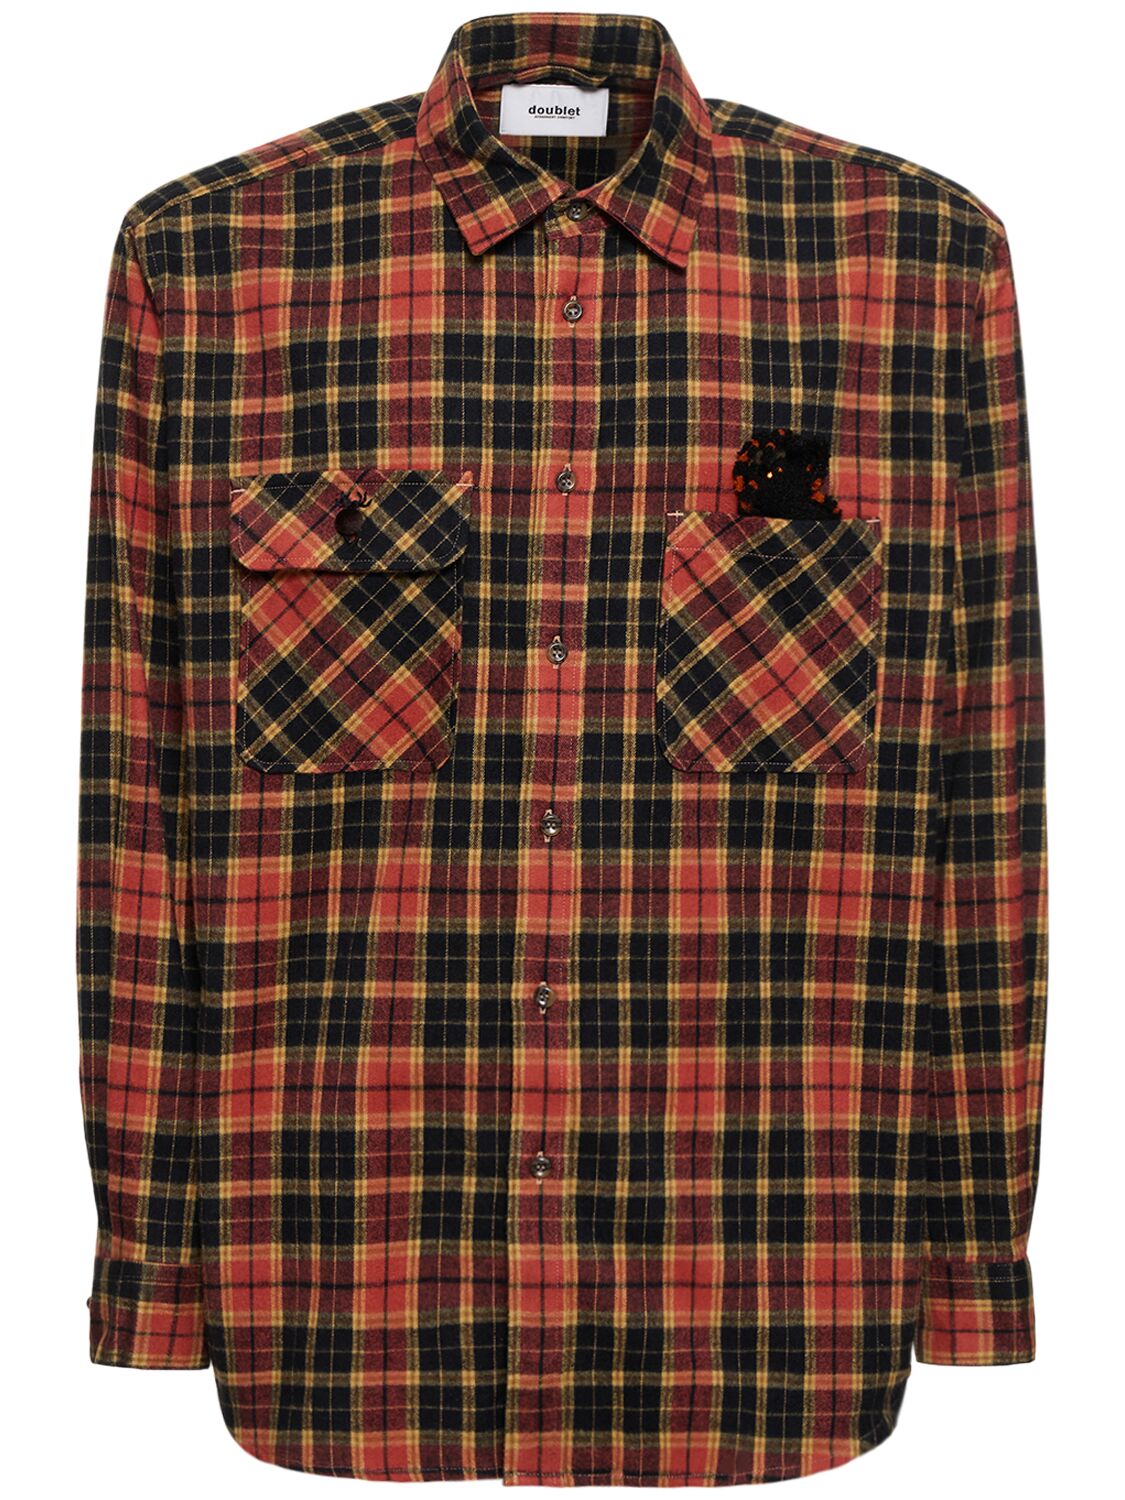 Doublet Check Cotton Shirt W/spider In Red